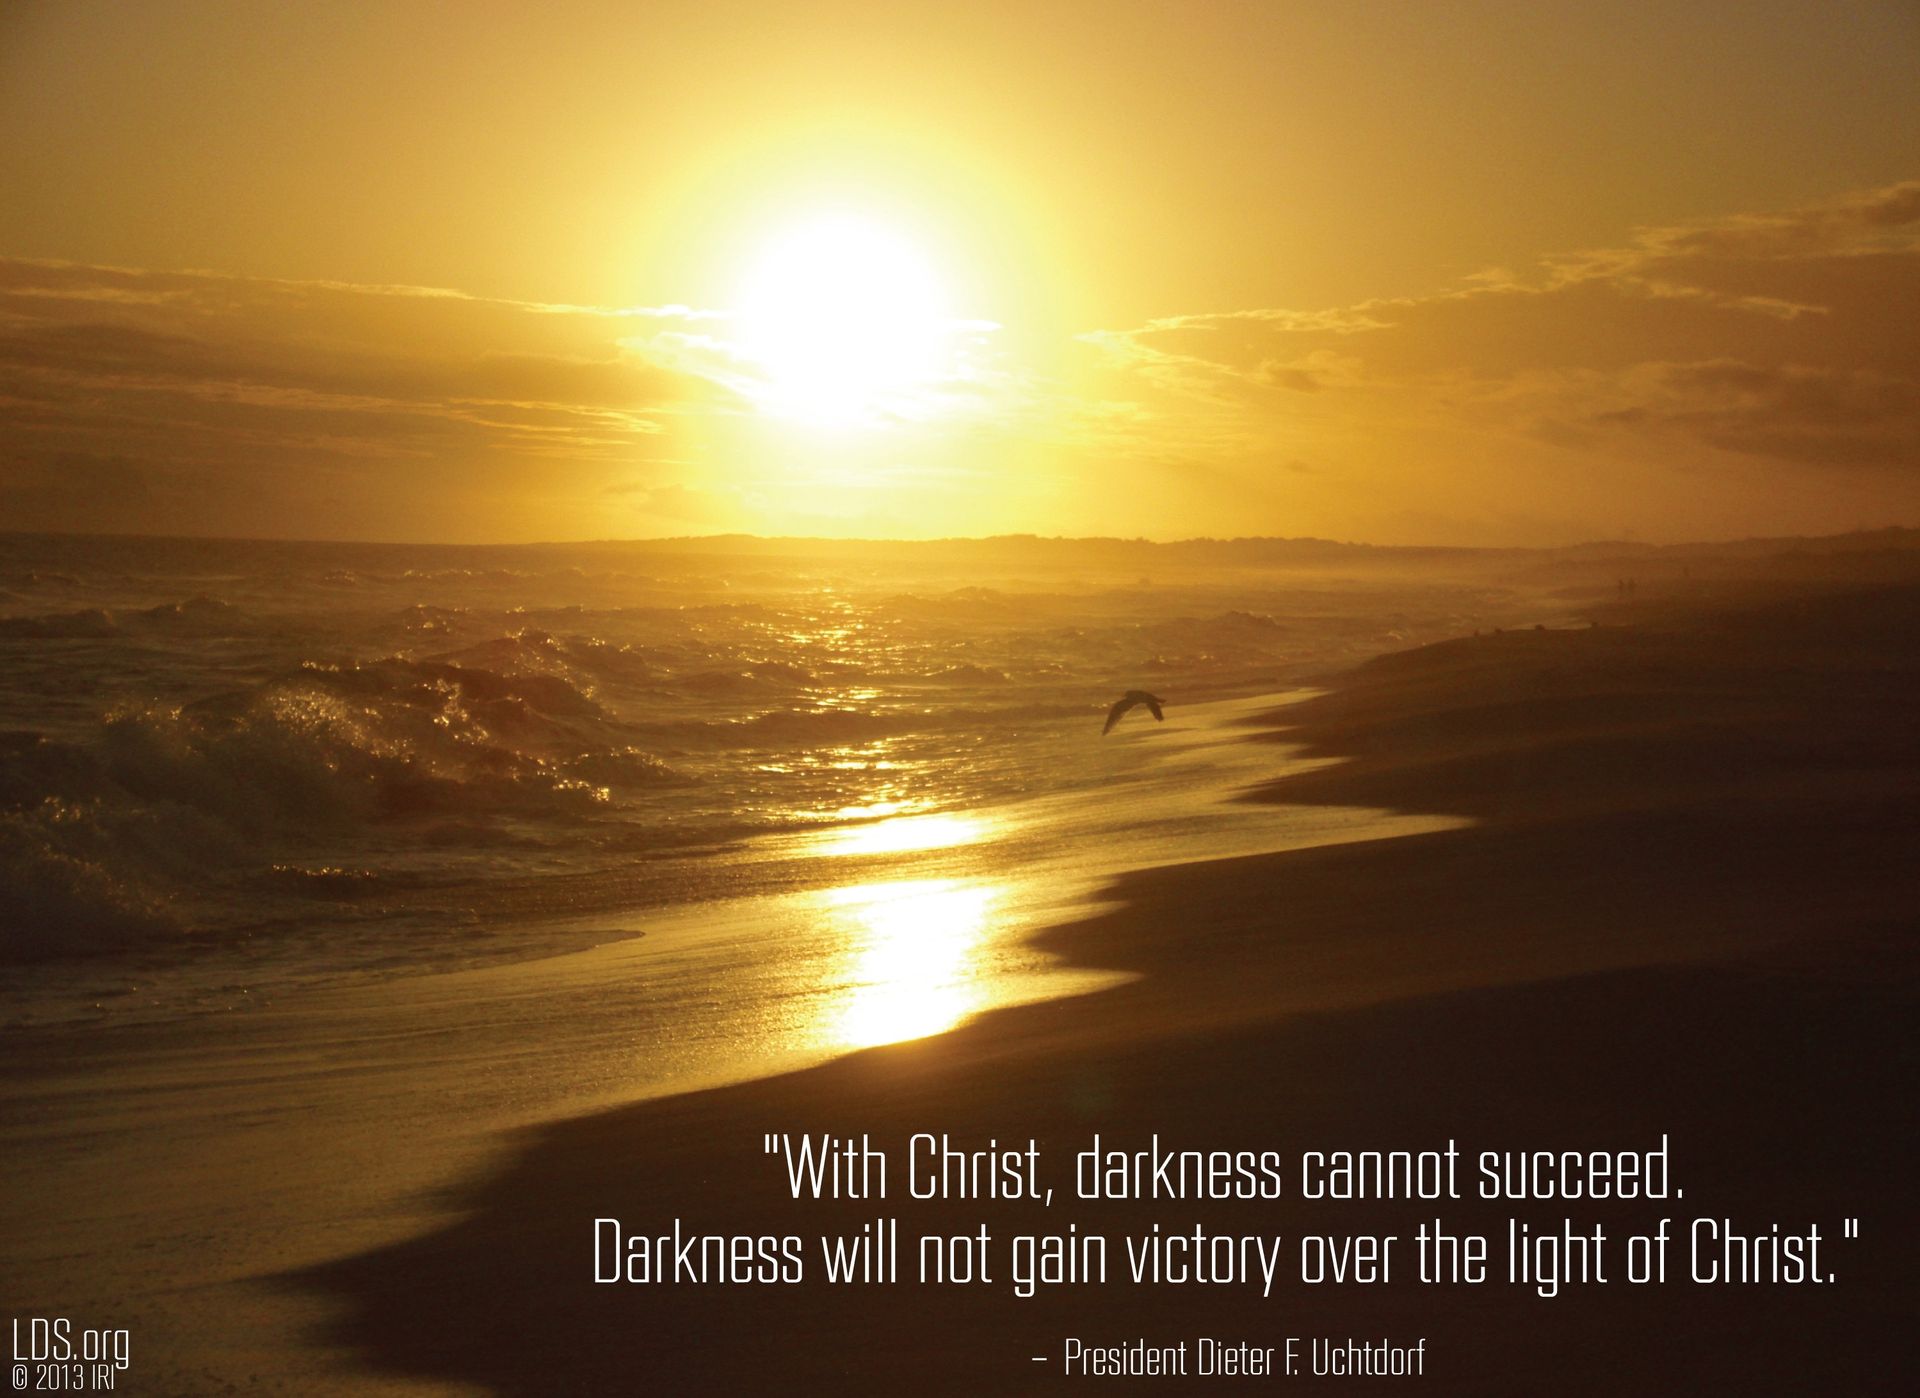 “With Christ, darkness cannot succeed. Darkness will not gain victory over the light of Christ.”—President Dieter F. Uchtdorf, “The Hope of God’s Light” © undefined ipCode 1.